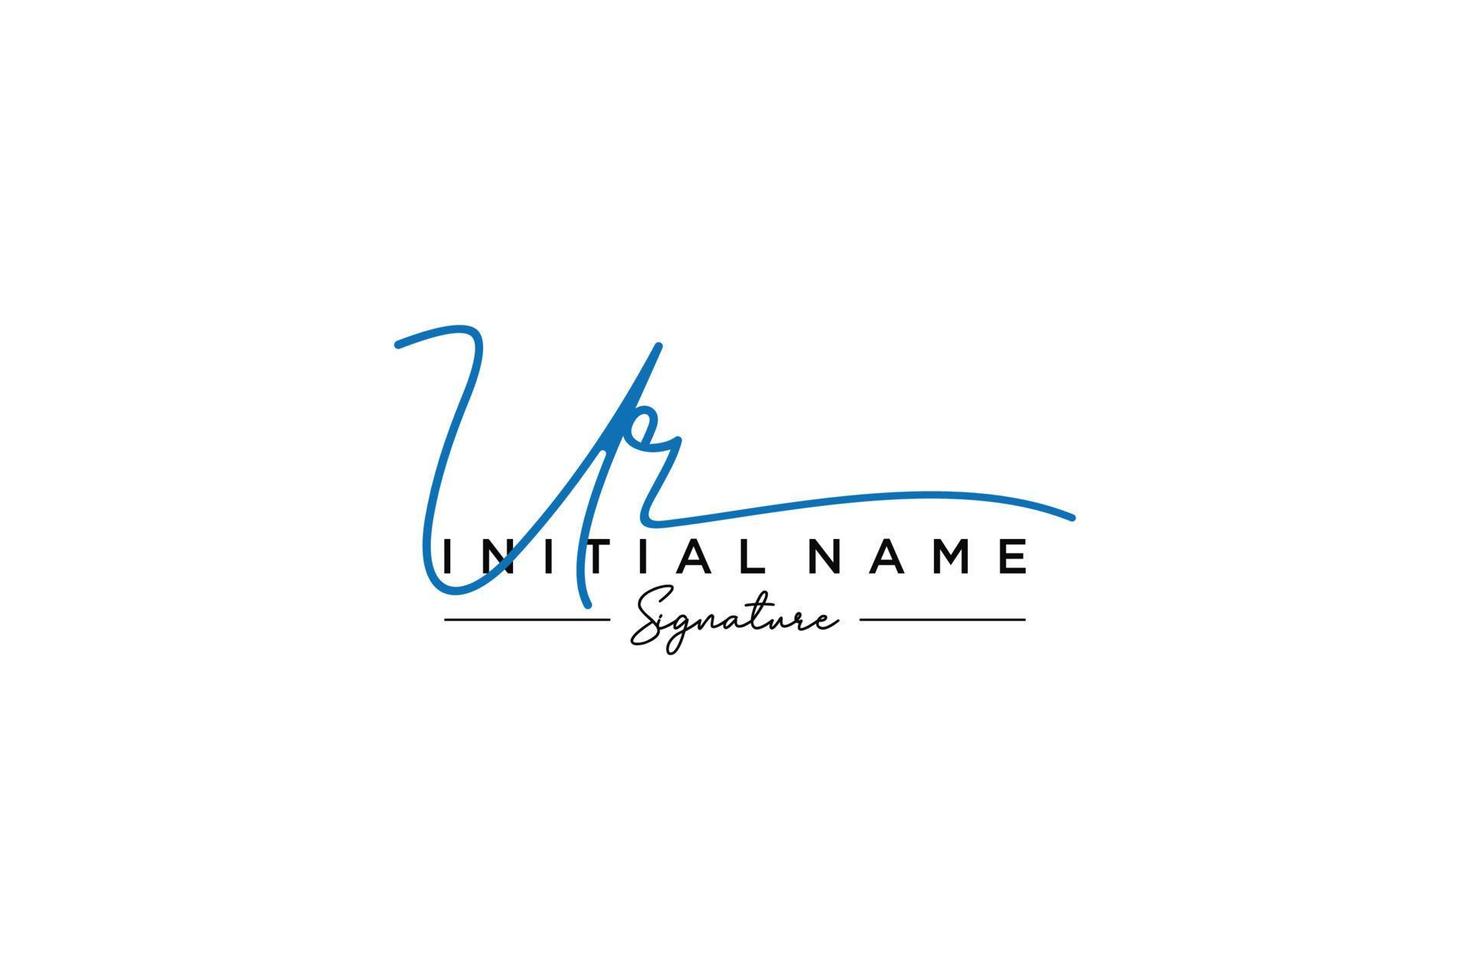 Initial UR signature logo template vector. Hand drawn Calligraphy lettering Vector illustration.